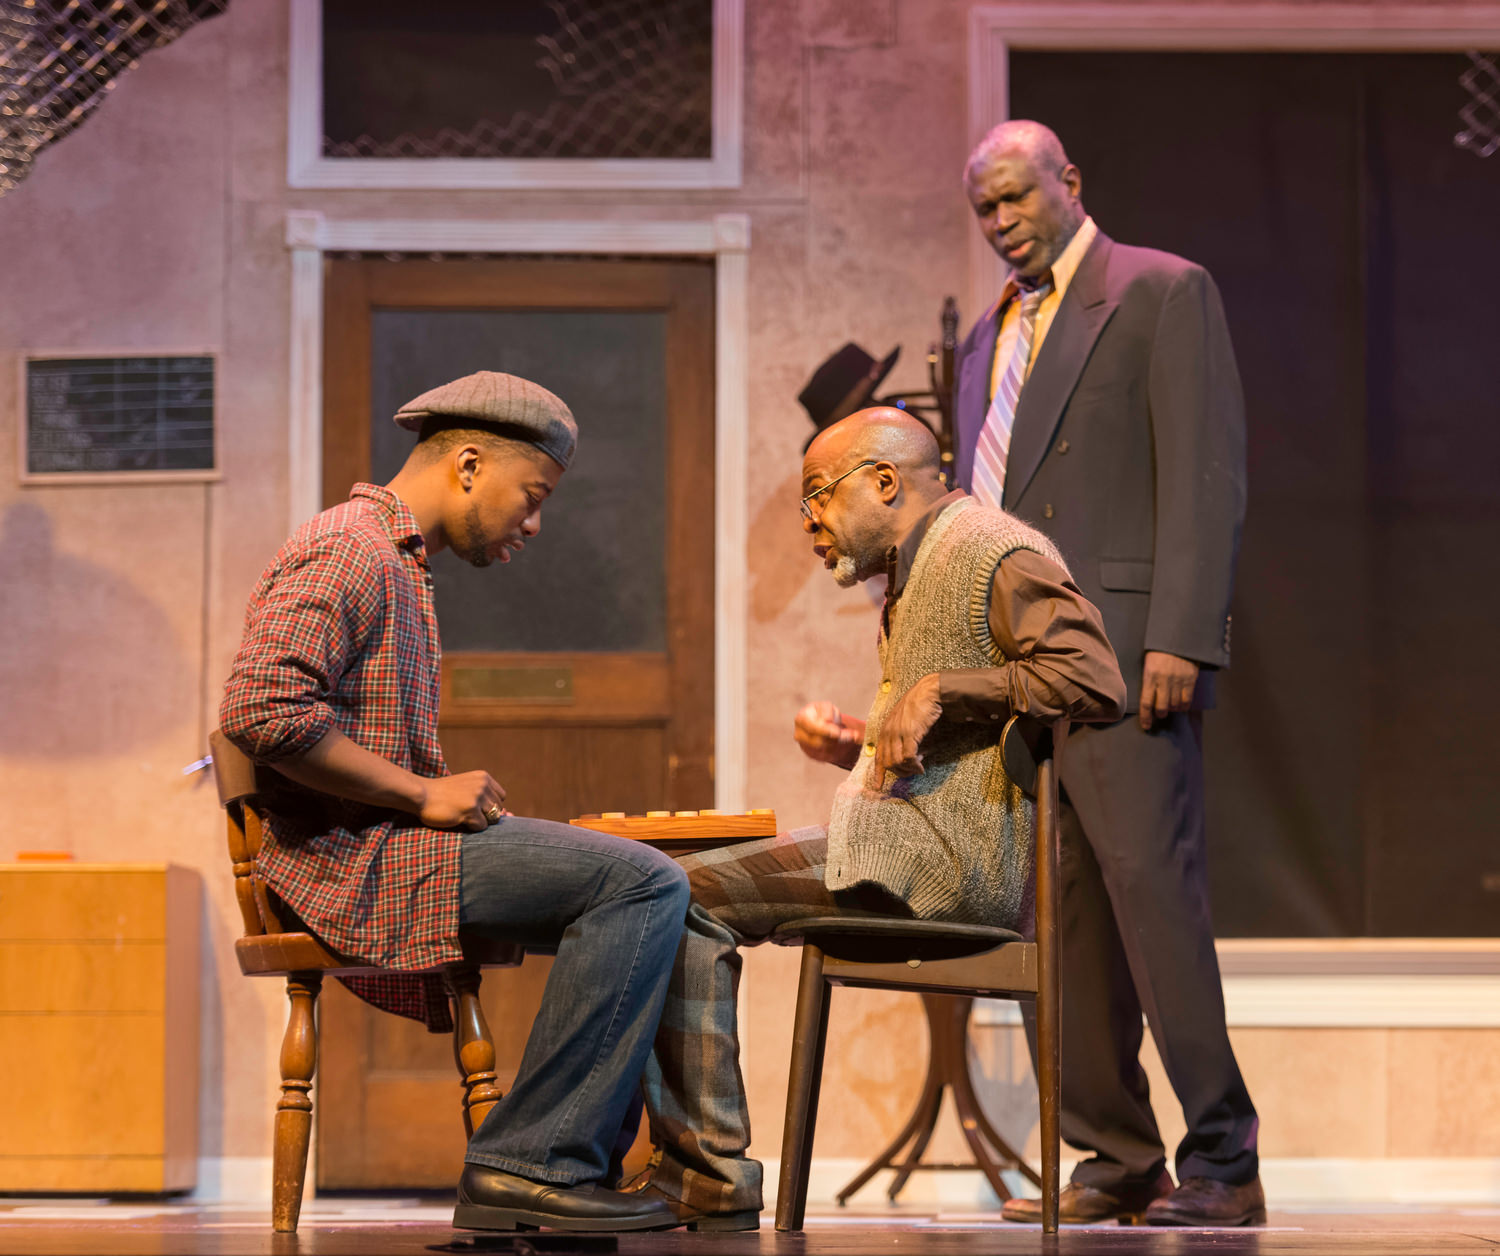 Edward Neville Ewell (Youngblood), ShawnJ West (Turnbo), and Trevor Nigel Lawrence (Fielding) in African-American Shakespeare Company’s production of August Wilson’s ‘Jitney’, directed by L. Peter Callender; photo credit: Lance Huntley